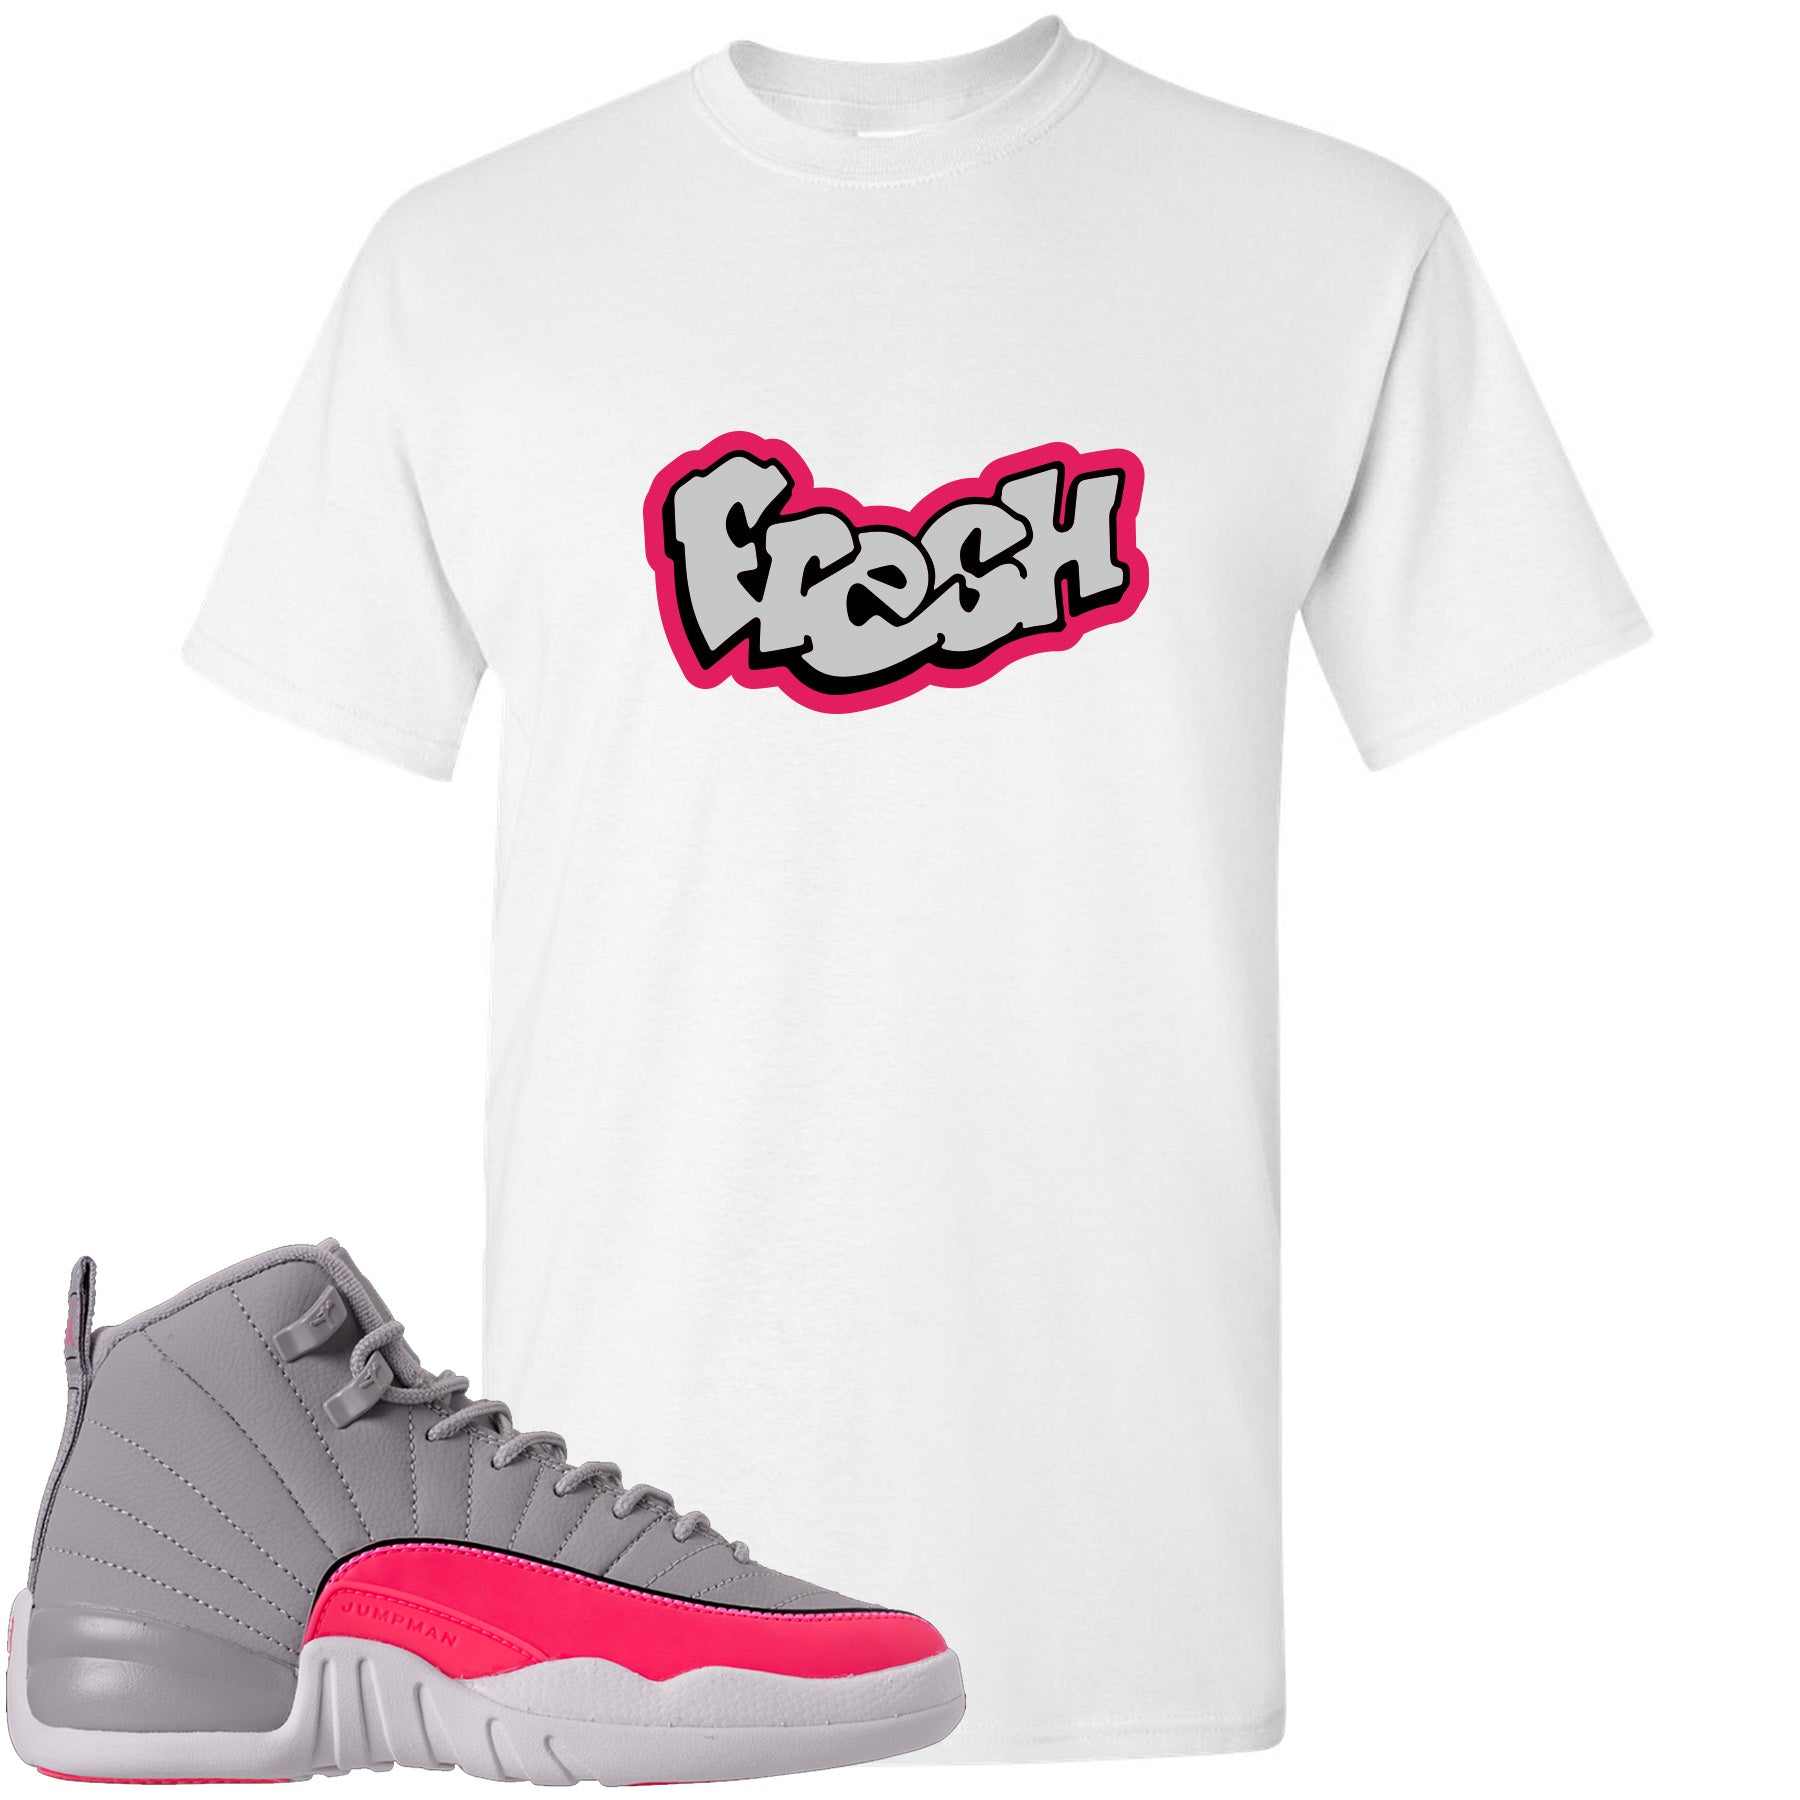 shirt to match grey and white 12s